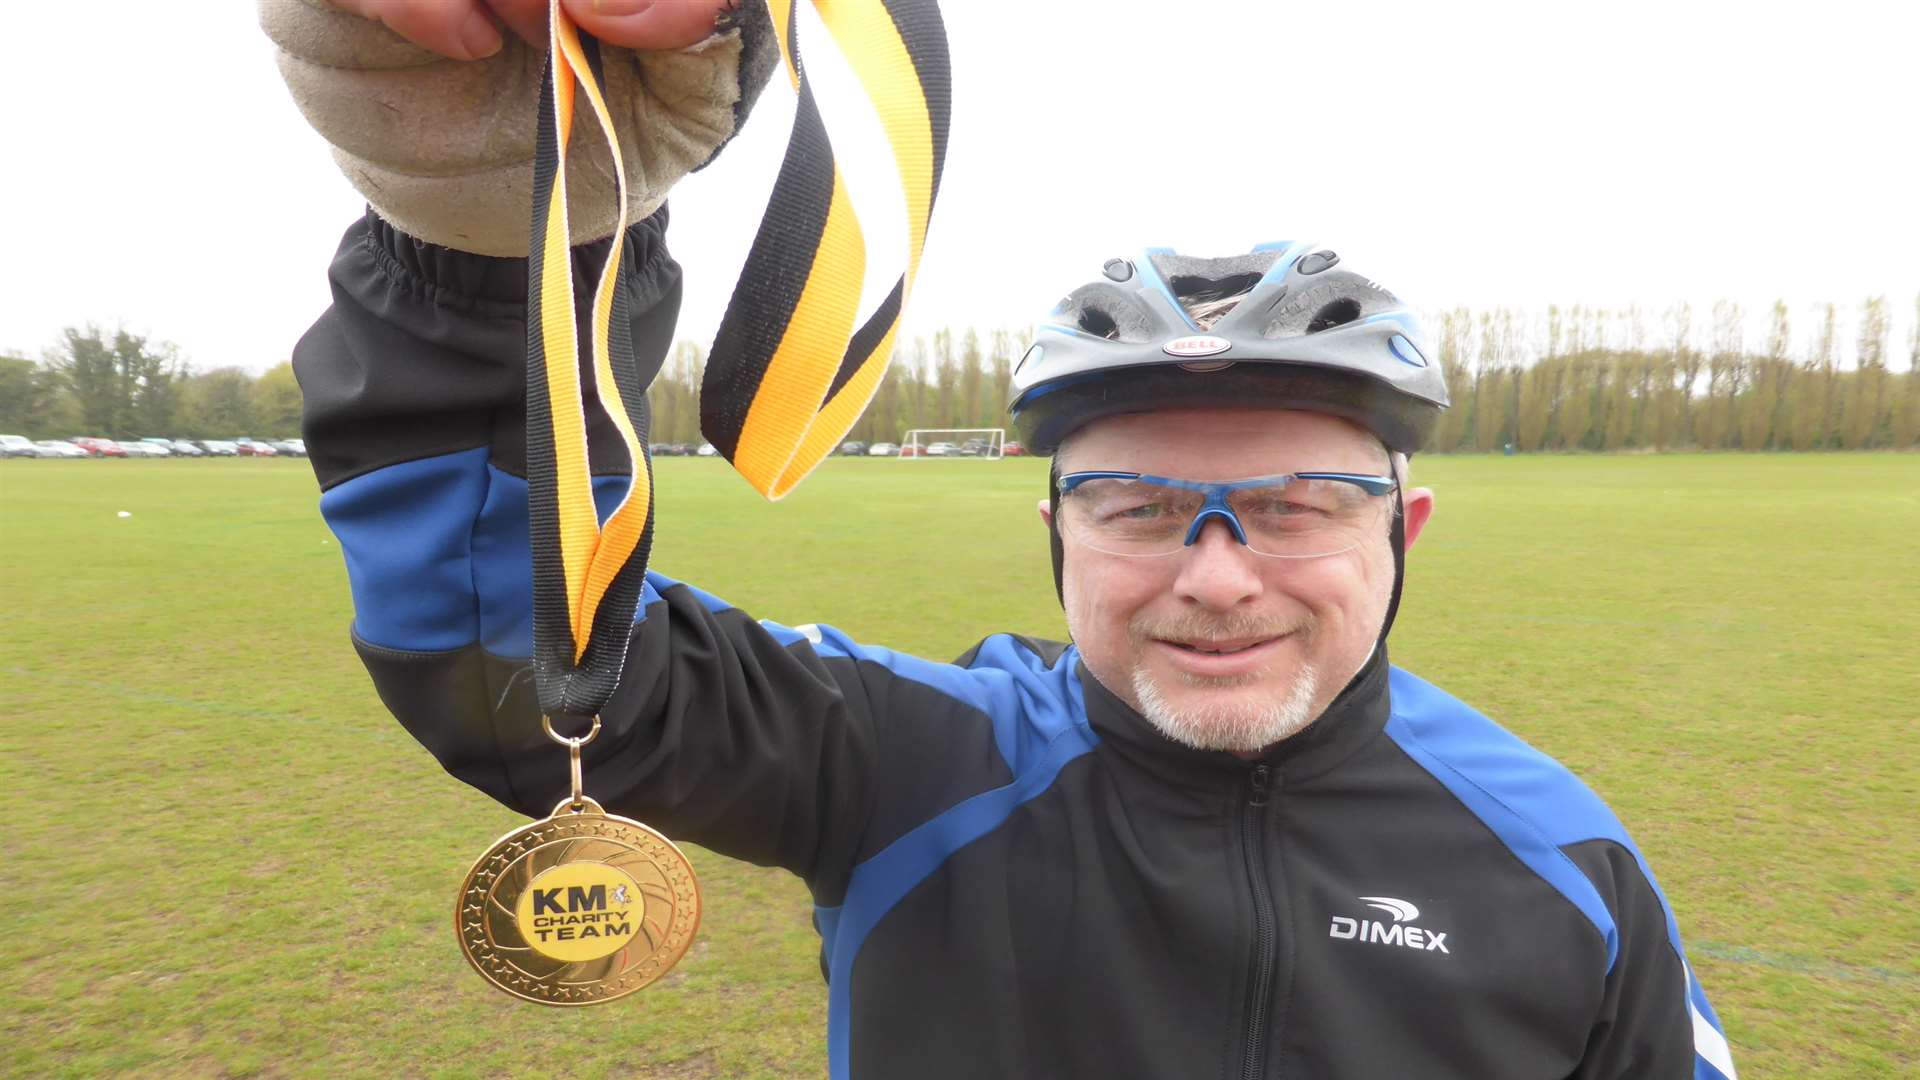 Andy Bellingham of Ramsgate celebrates completing the KM Big Bike Ride 2015 with his medal.